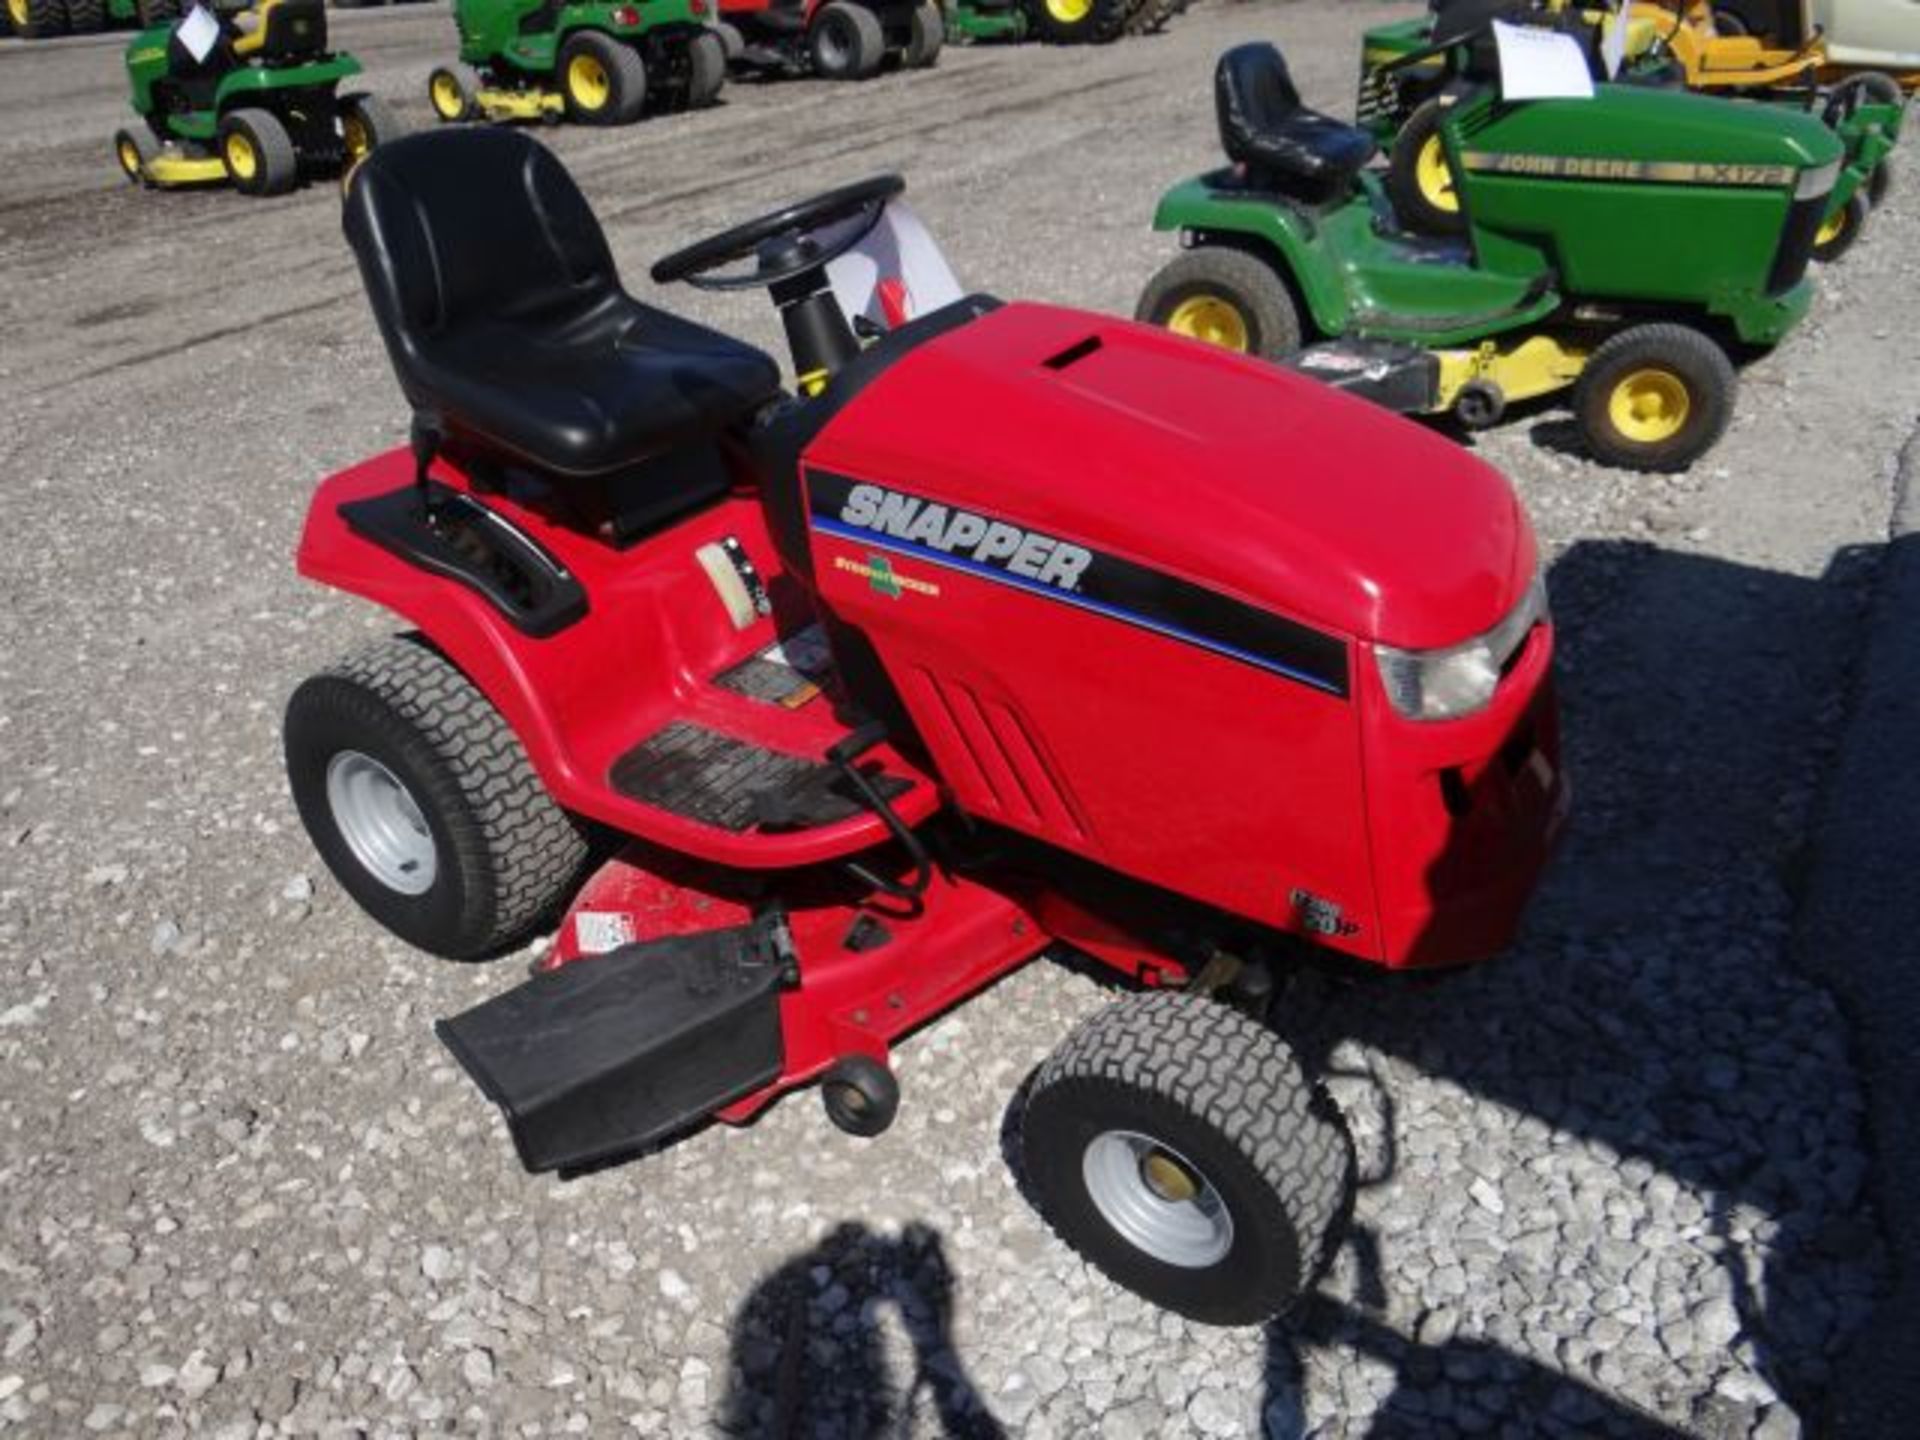 Lot 90831 - 2008 Snapper LT2042 Mower 532 hrs, 20hp, Briggs, Air Cooled, Hydro, 42" Deck, - Image 2 of 4